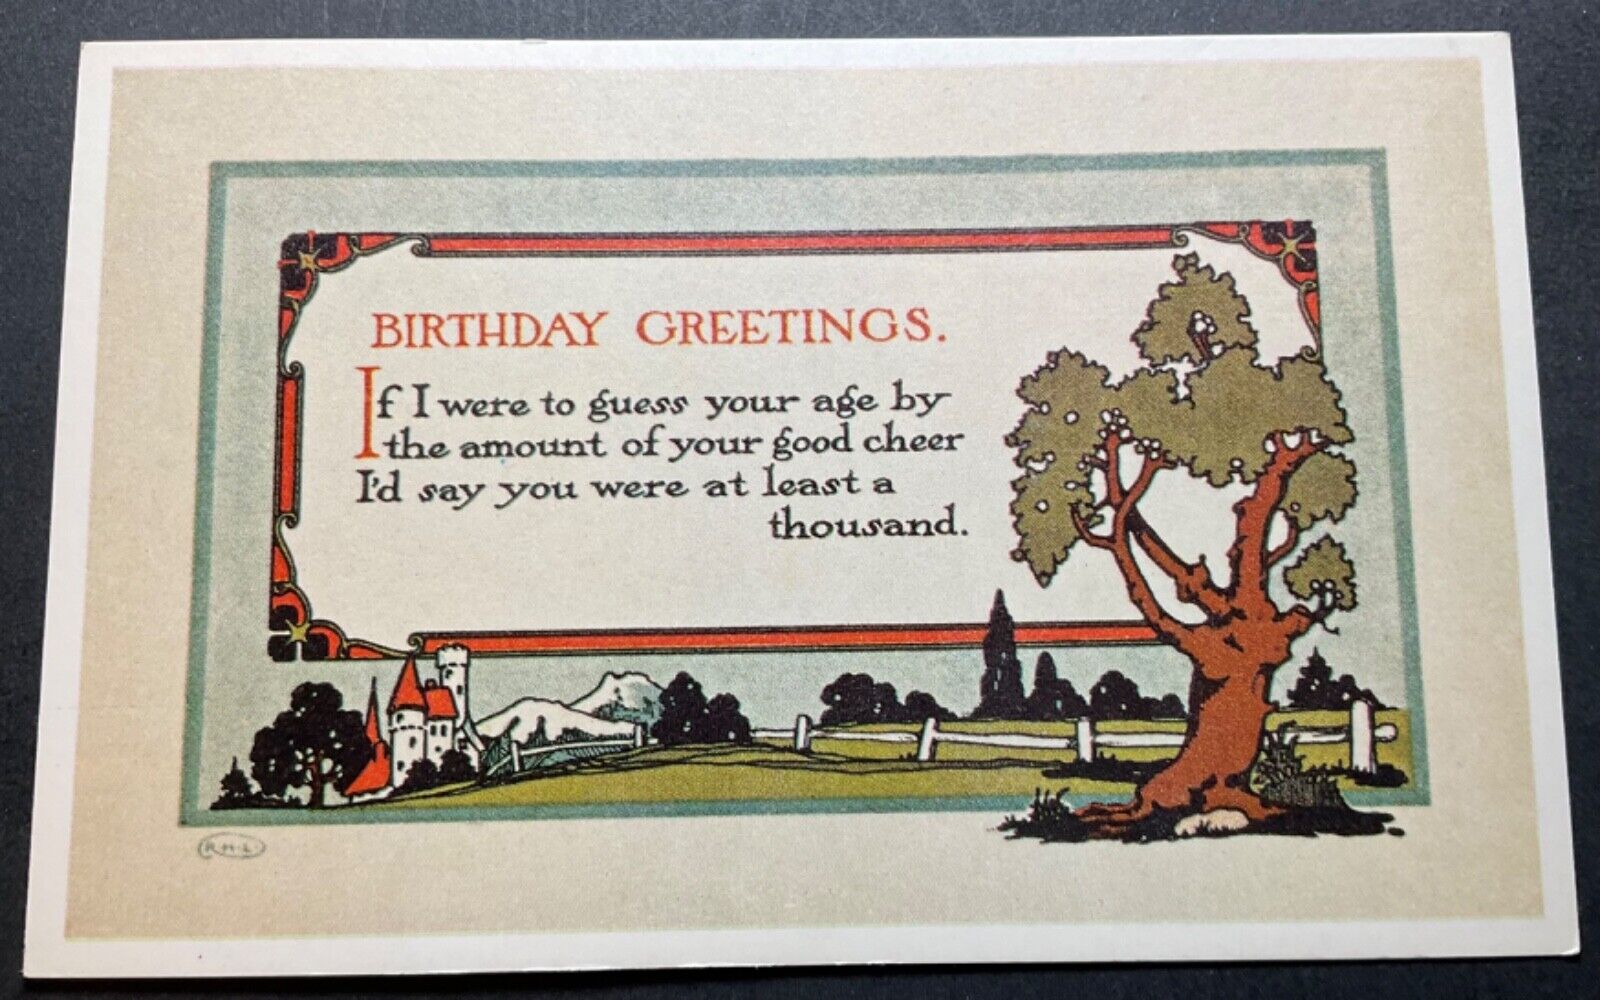 Greetings Postcard Birthday Greetings I’d say you were at least a thousand